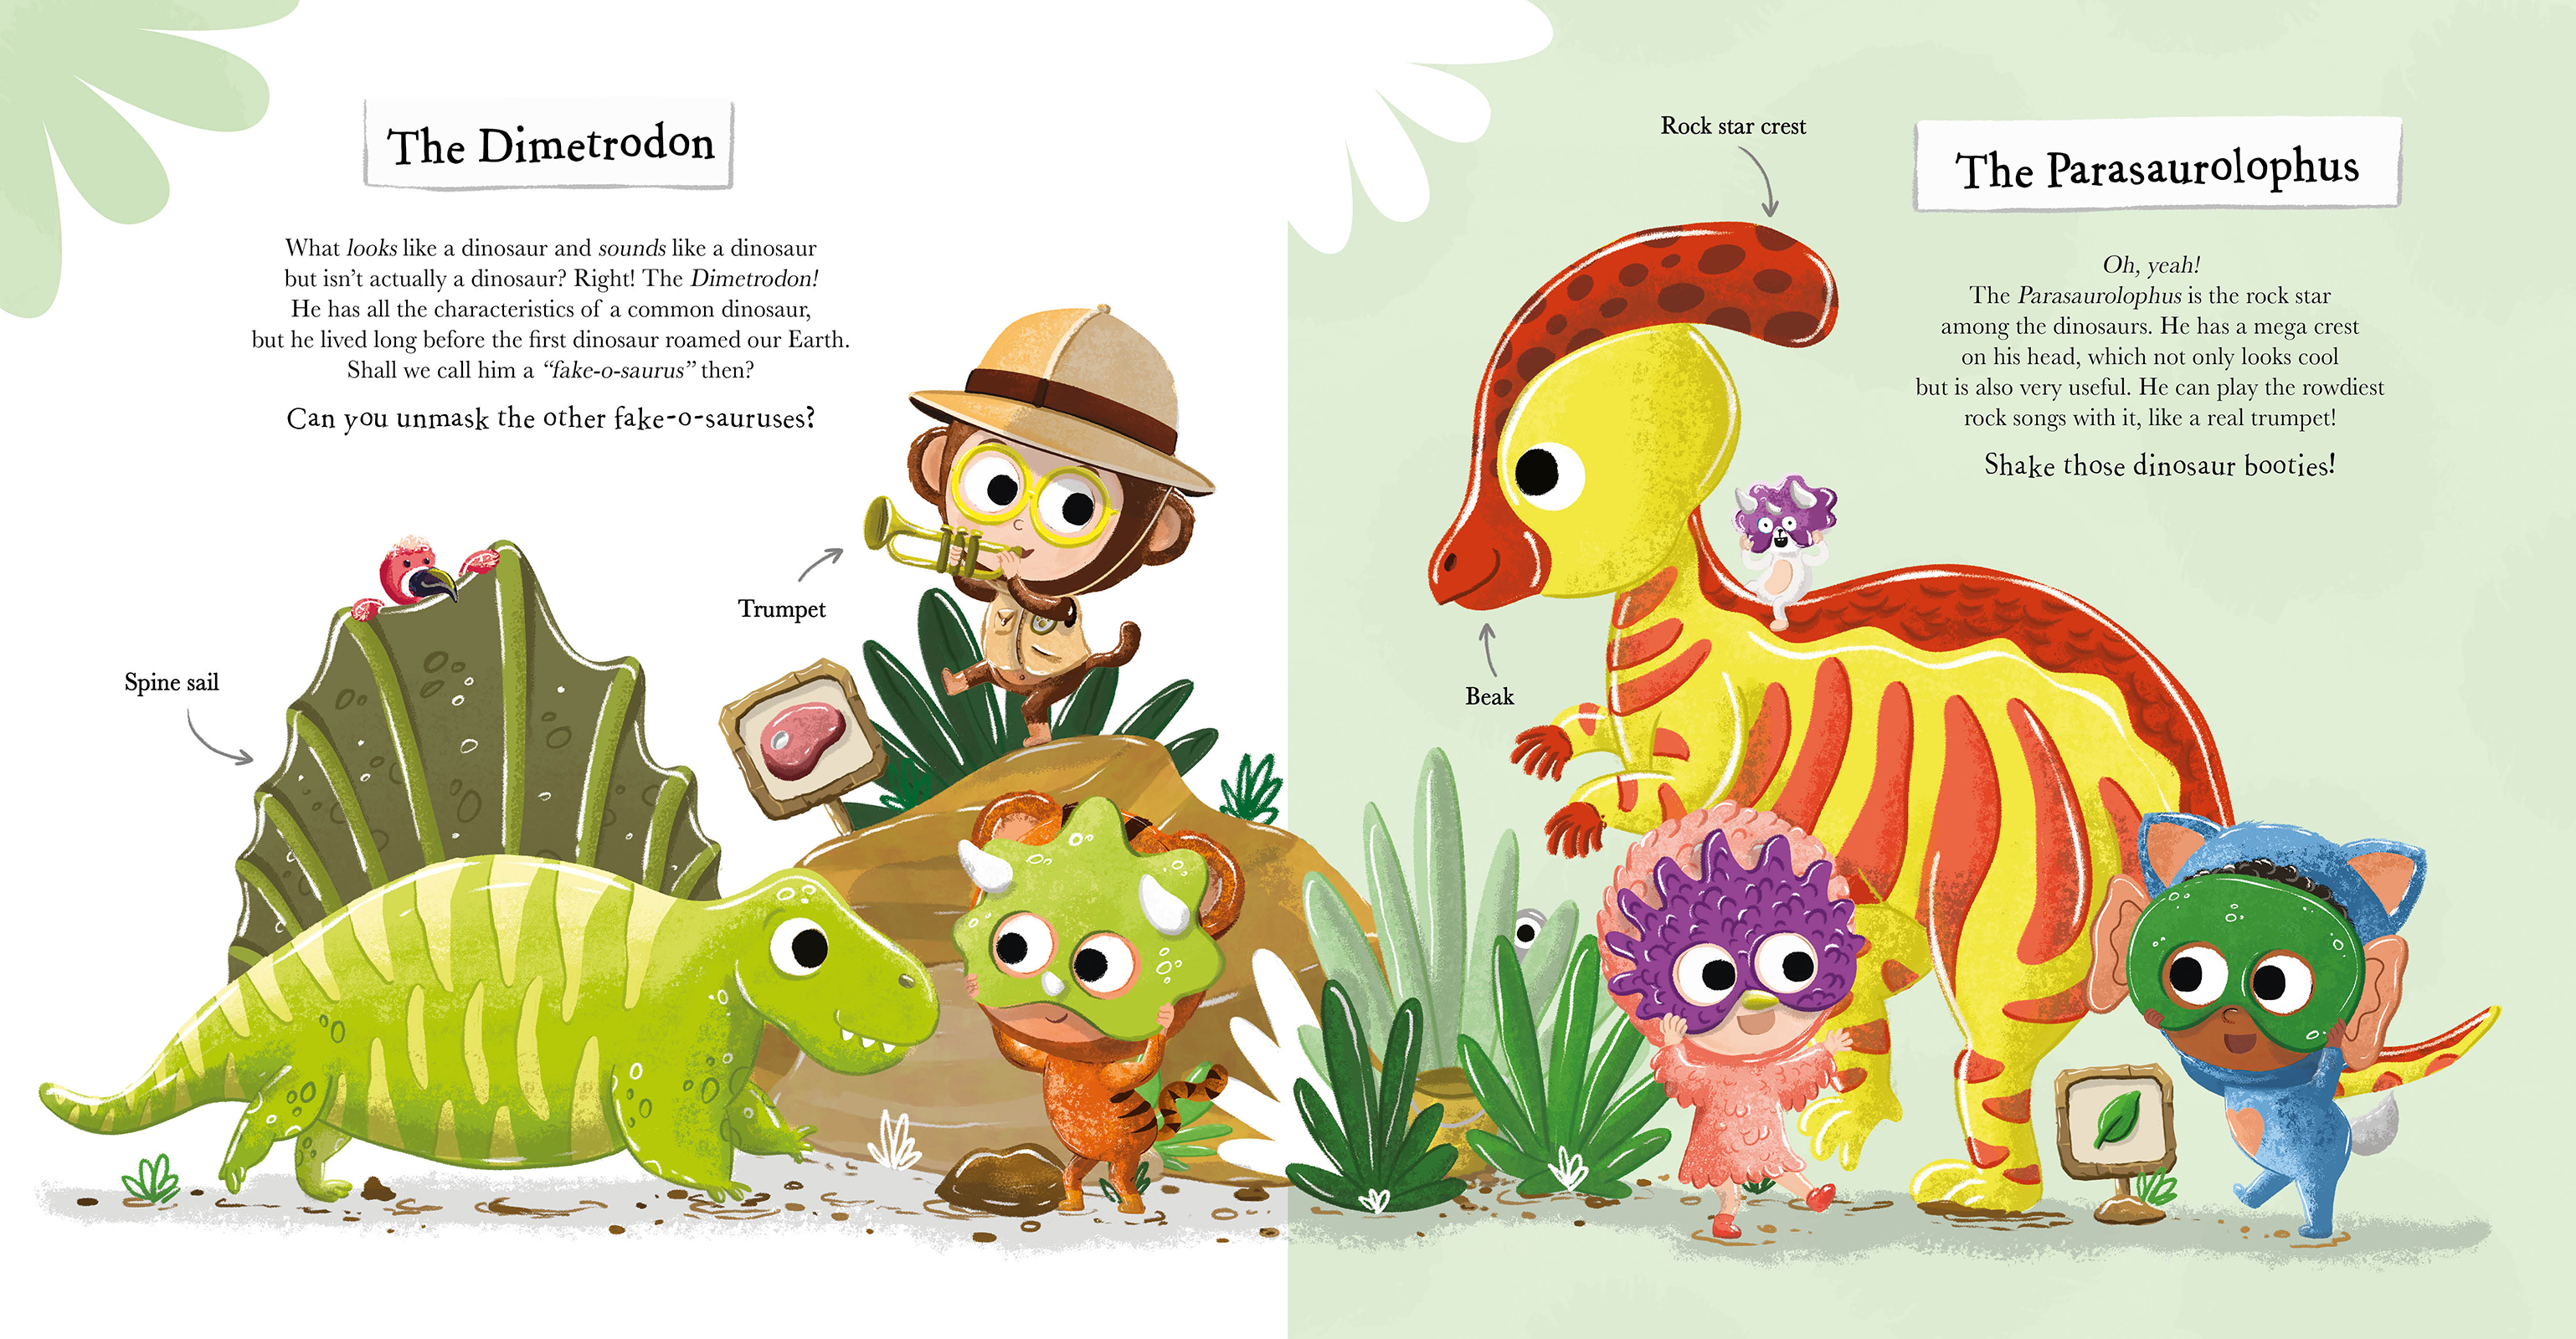 Furry Friends. Dinosaurs! The Big Book of Dinosaurs